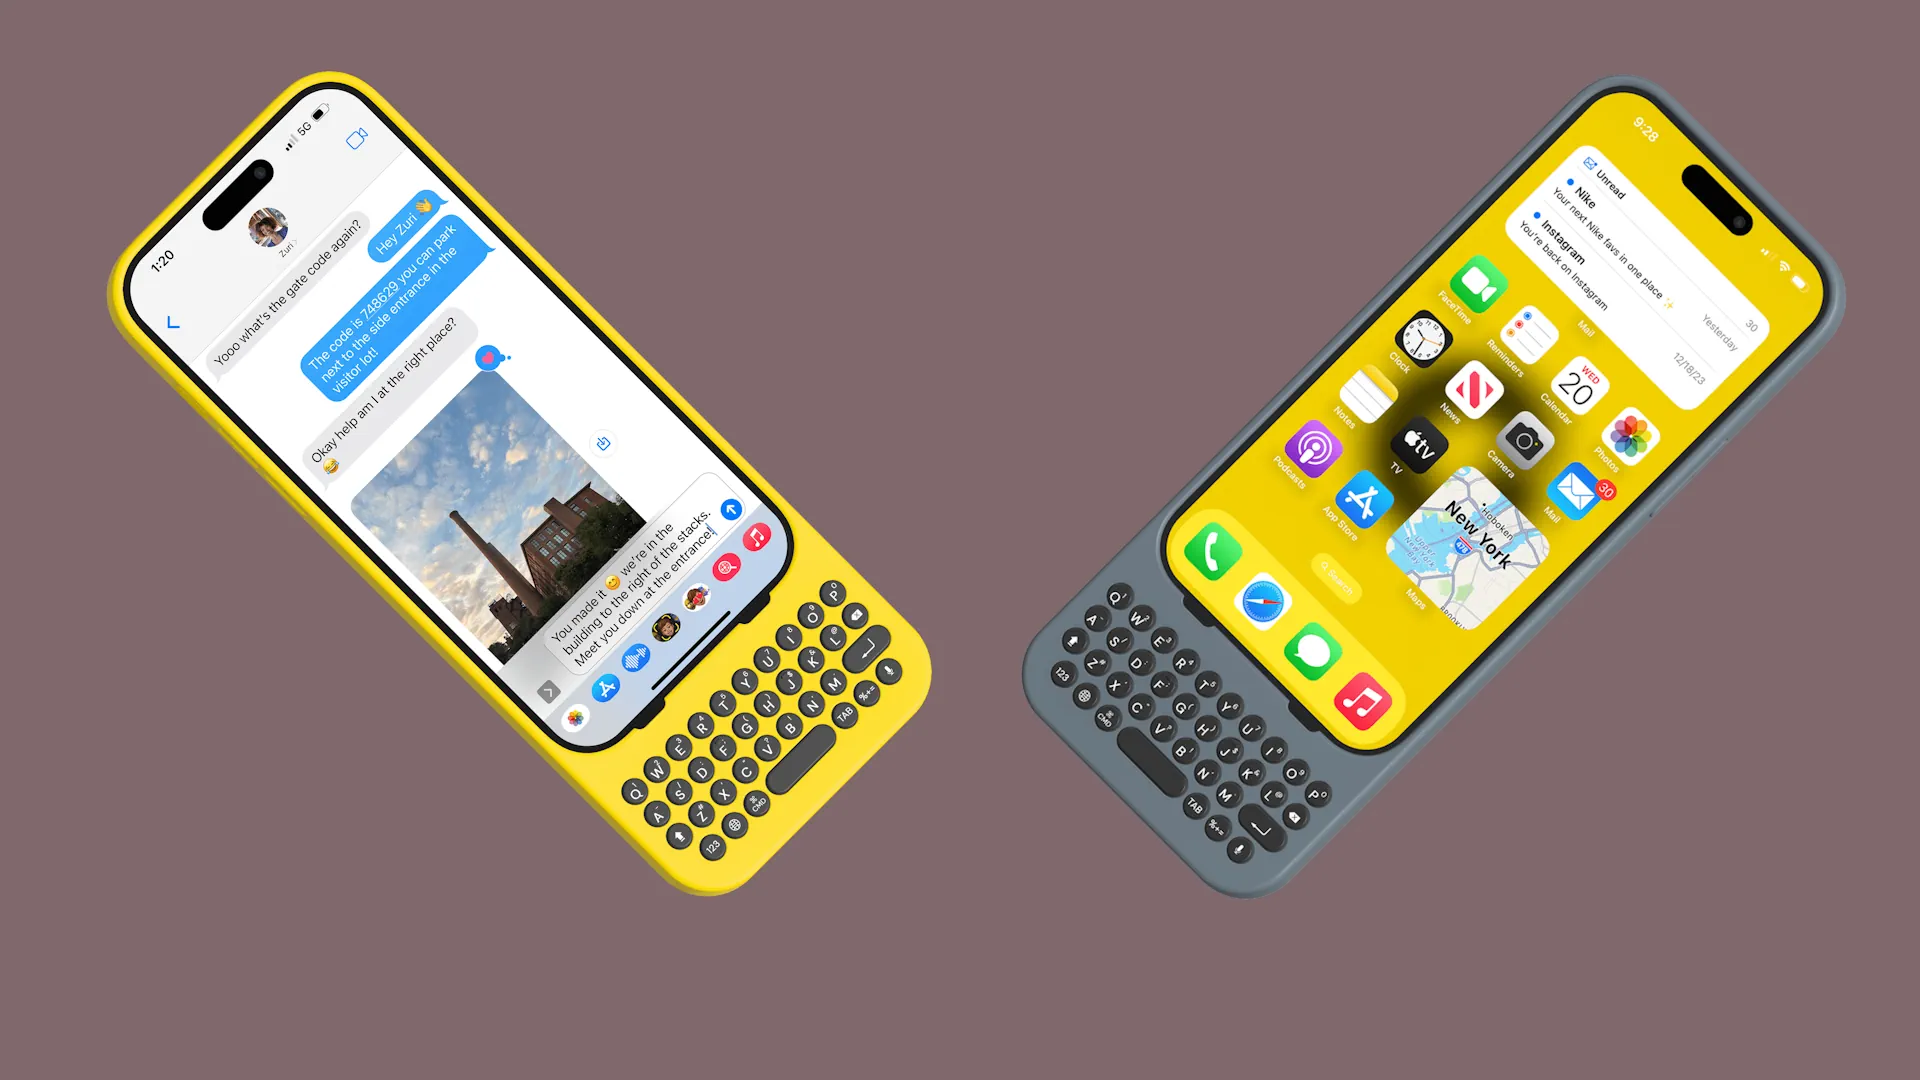 An iPhone accessory that will delight nostalgics: a physical keyboard with buttons